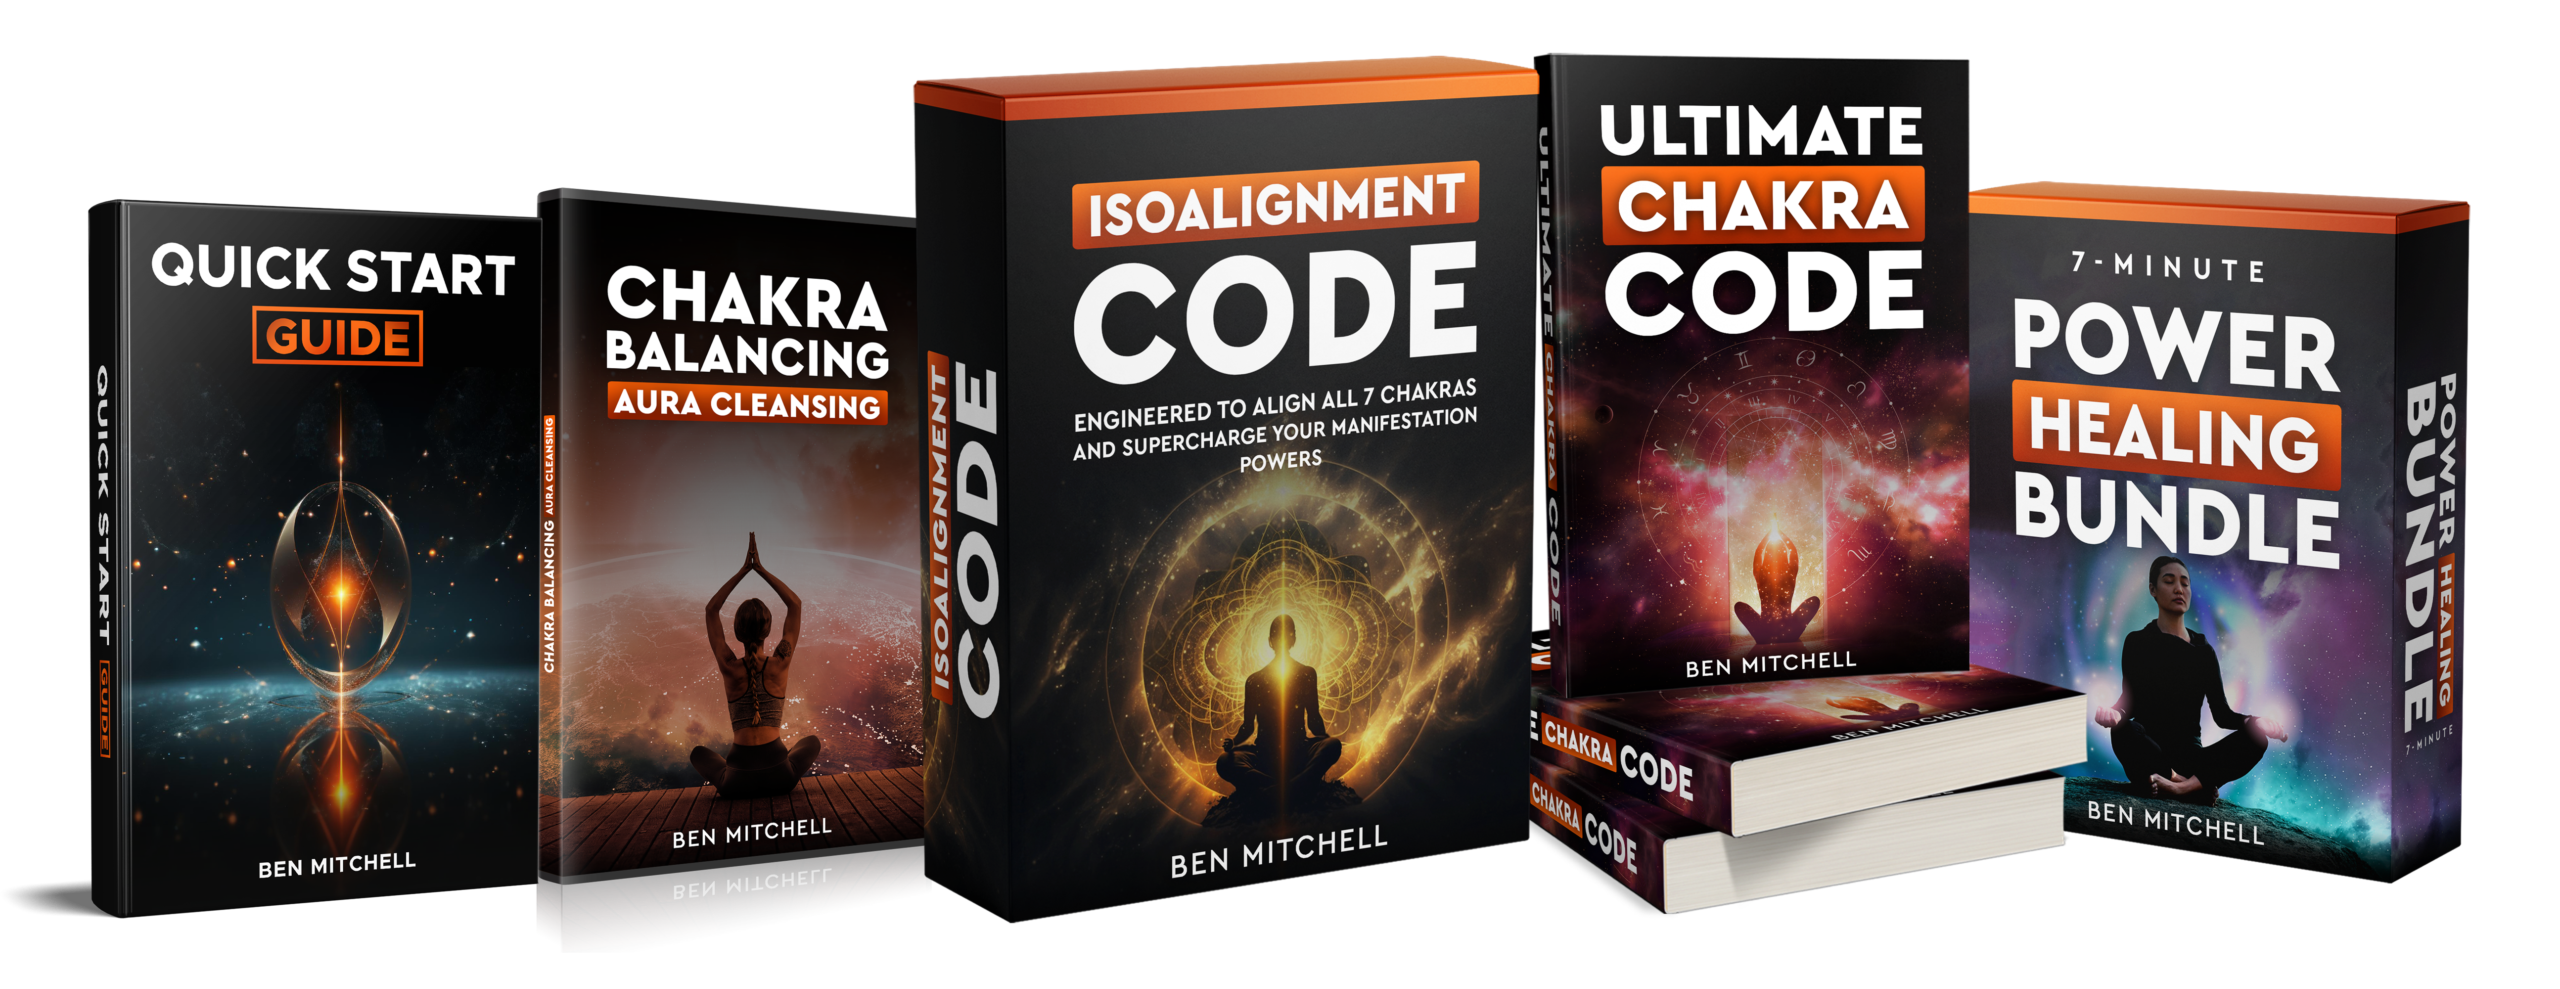 Isoalignment Code Reviews